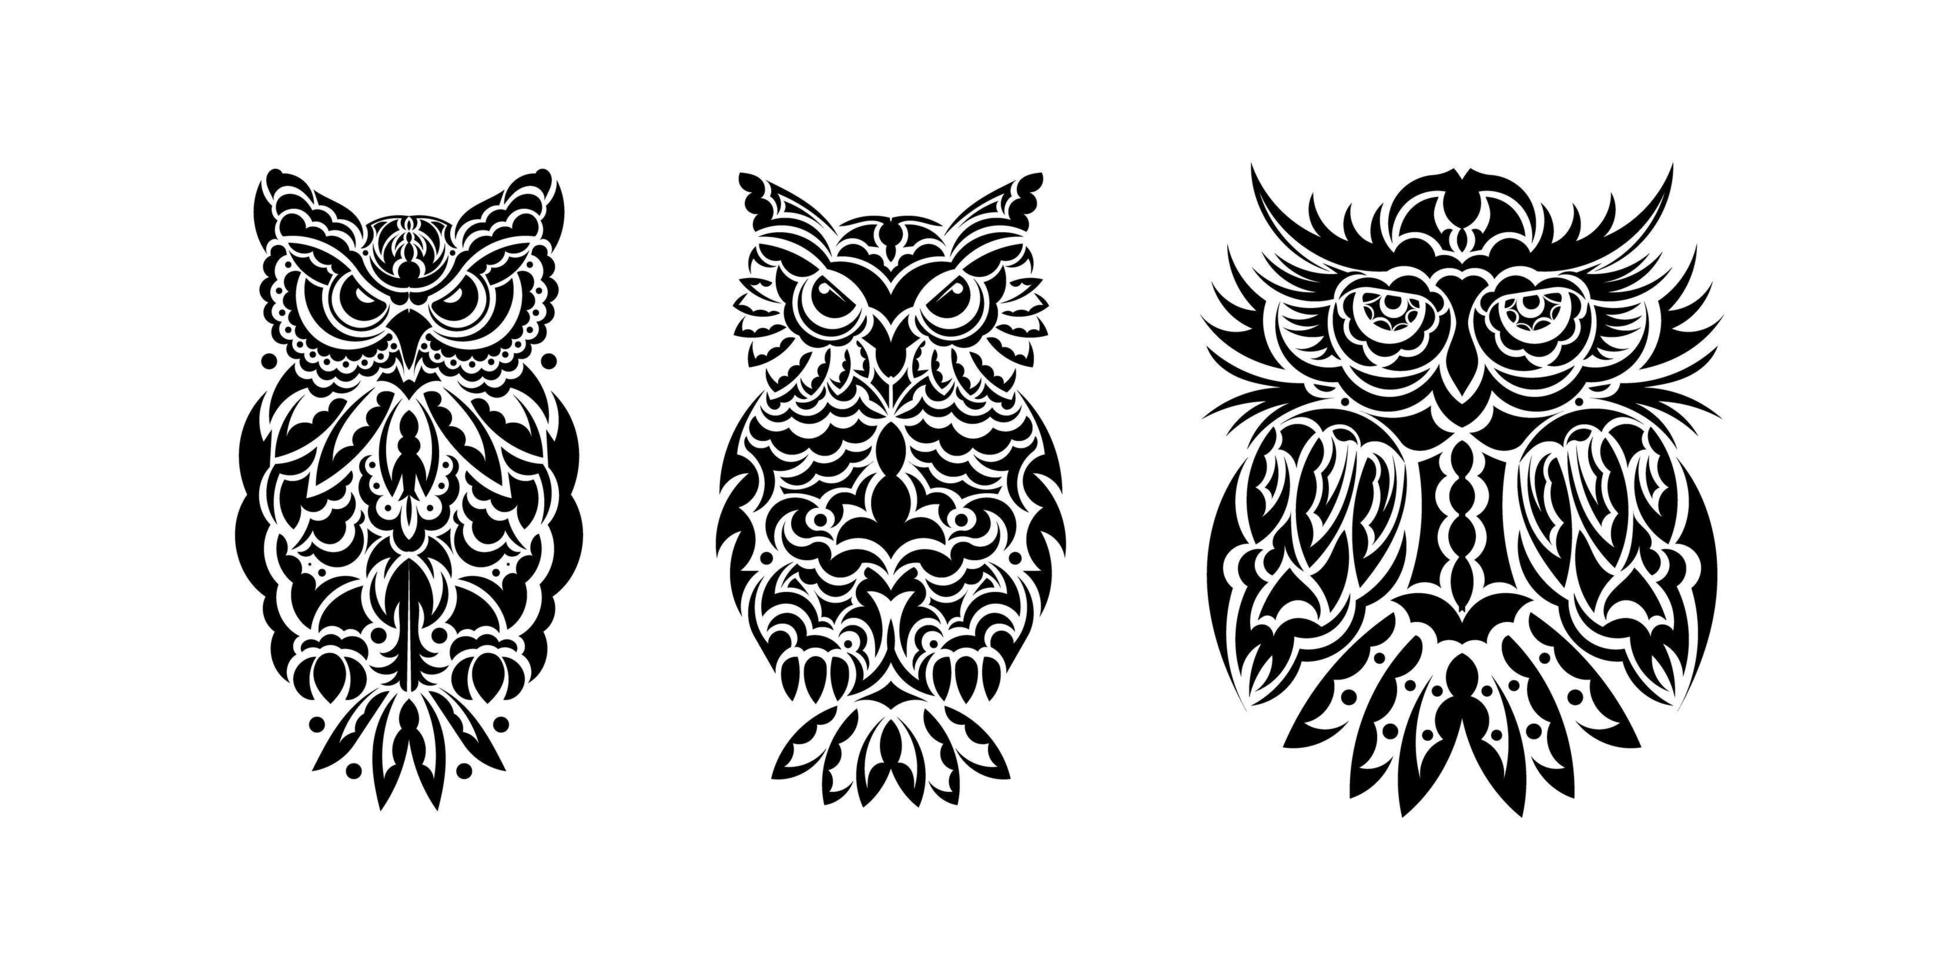 Set of owls print. Good for t-shirts, cups, phone cases and more. Vector illustration.